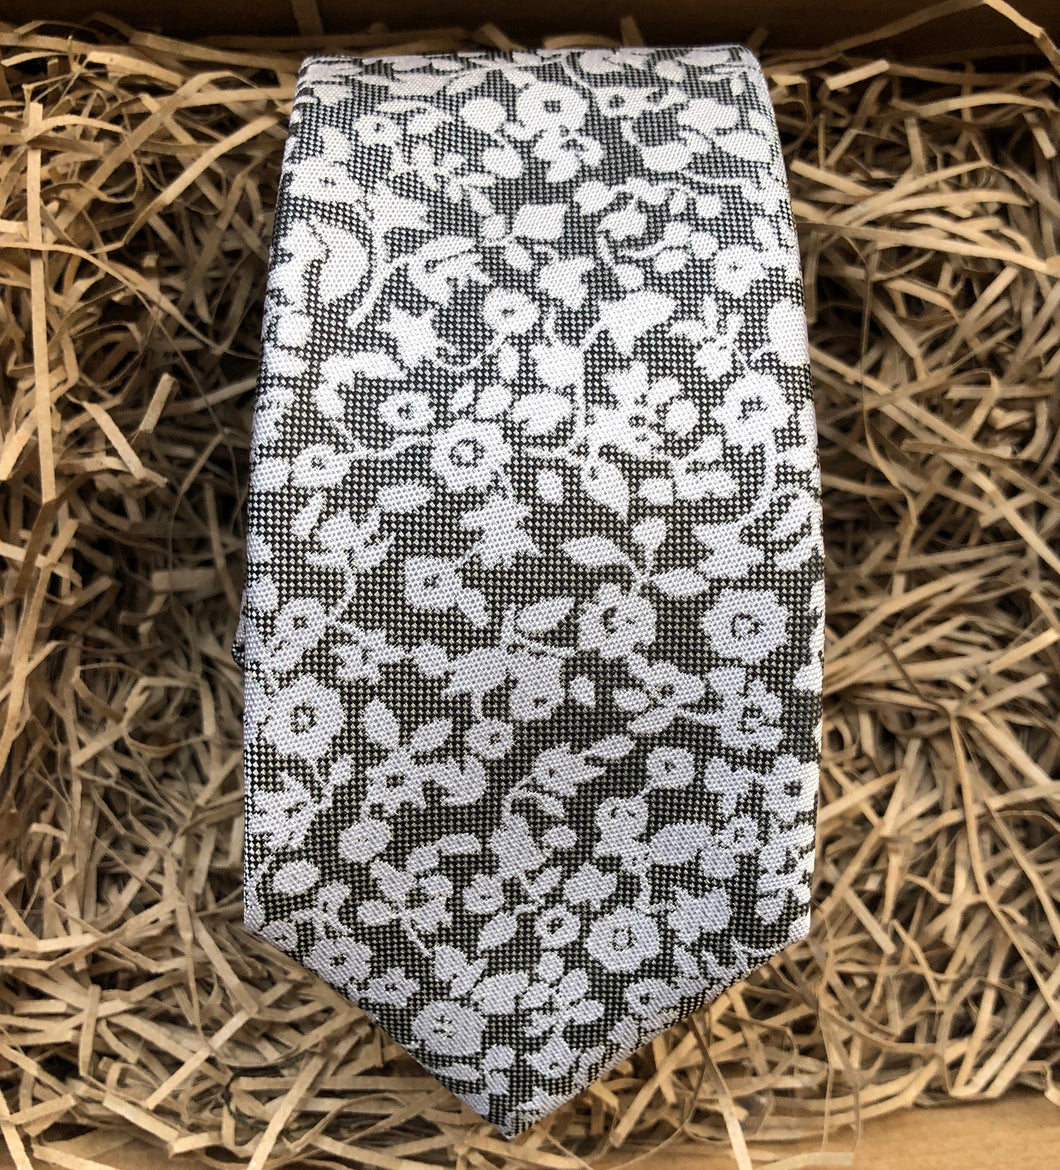 A silver grey tie with white flowers on a grey background. Ideal as a formal tie, wedding tie or for a special occasion. The tie is made by Daisy and Oak Studio and comes beautifully gift wrapped with free shipping.